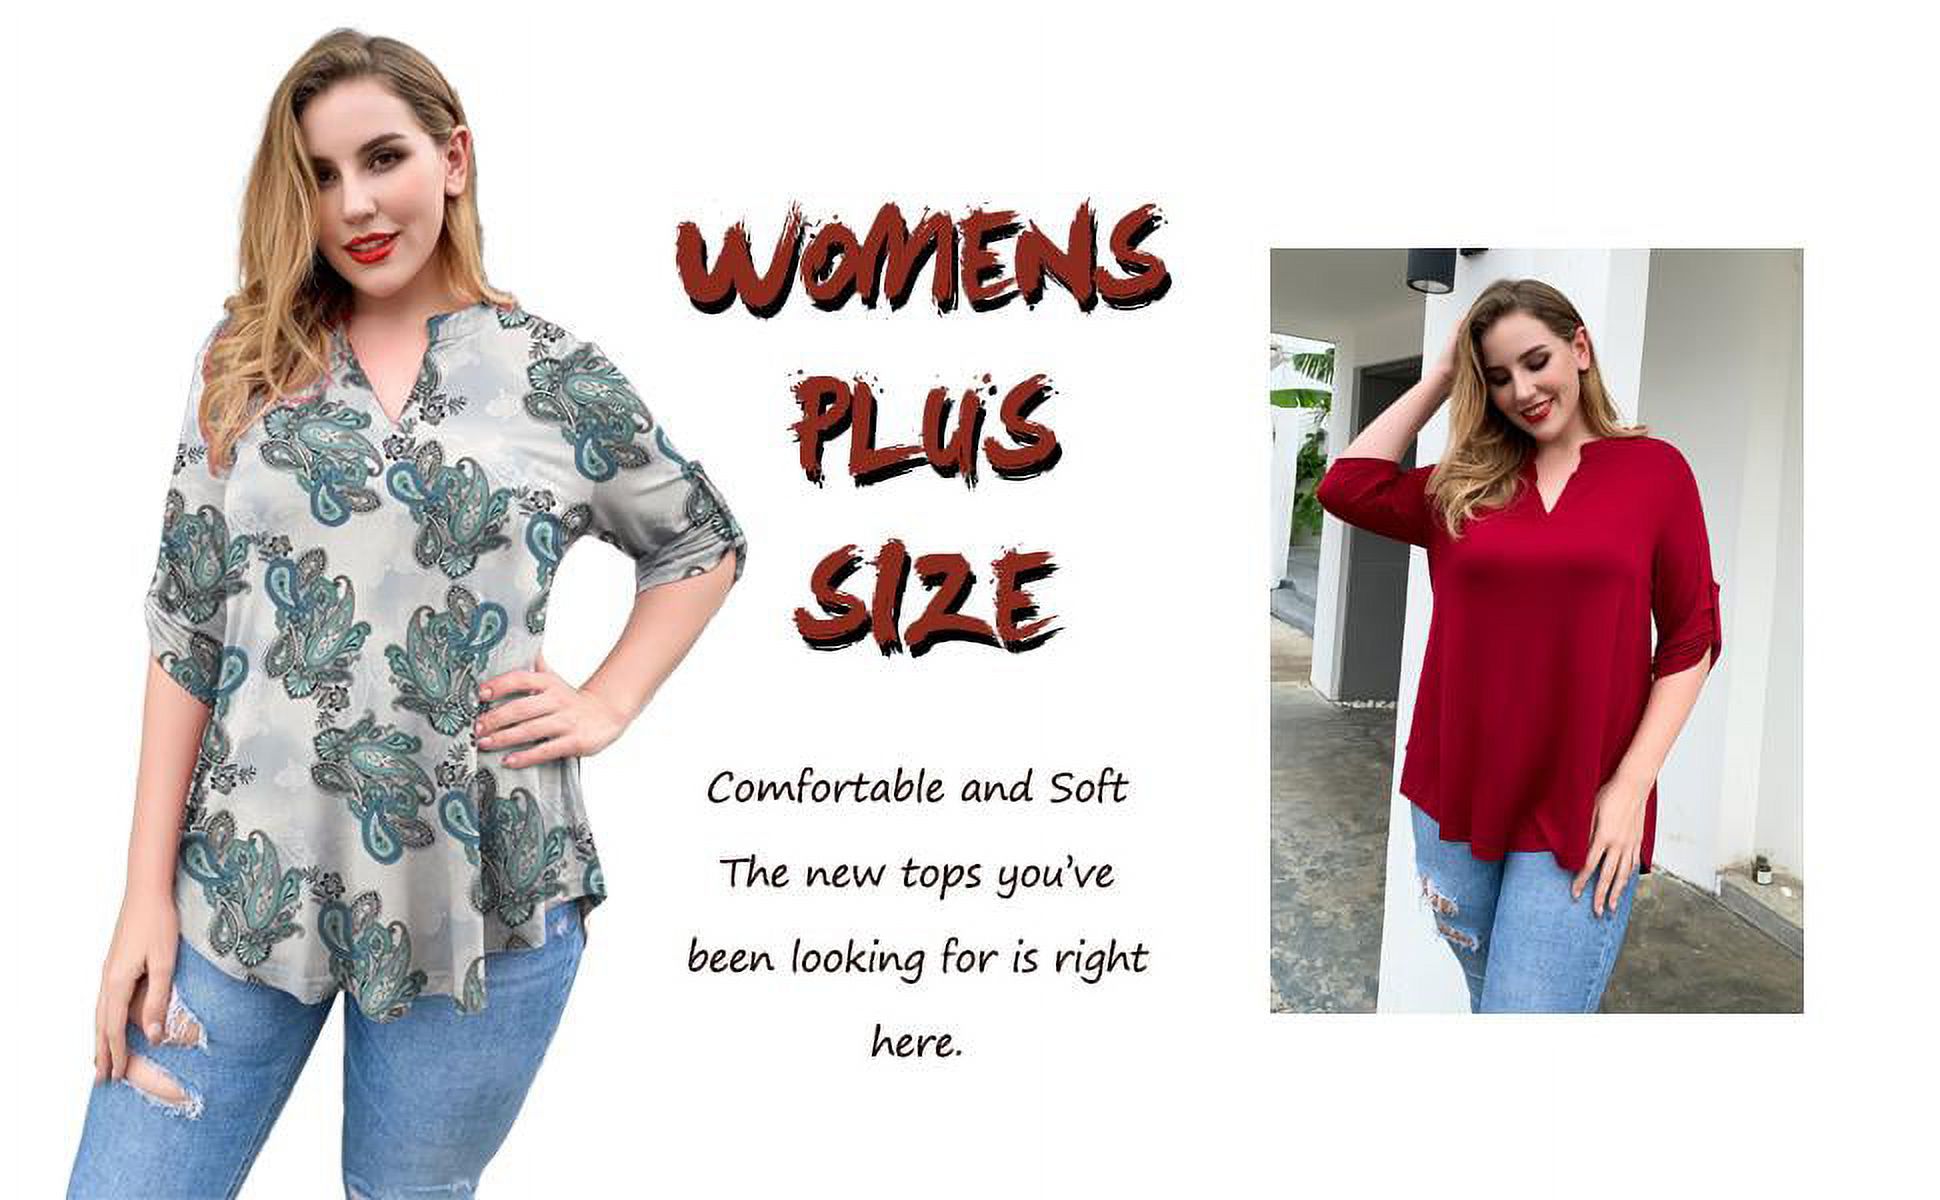 VERABENDI Womens Clothes Plus Size Tops Roll 3/4 Sleeve Shirts V Neck ...